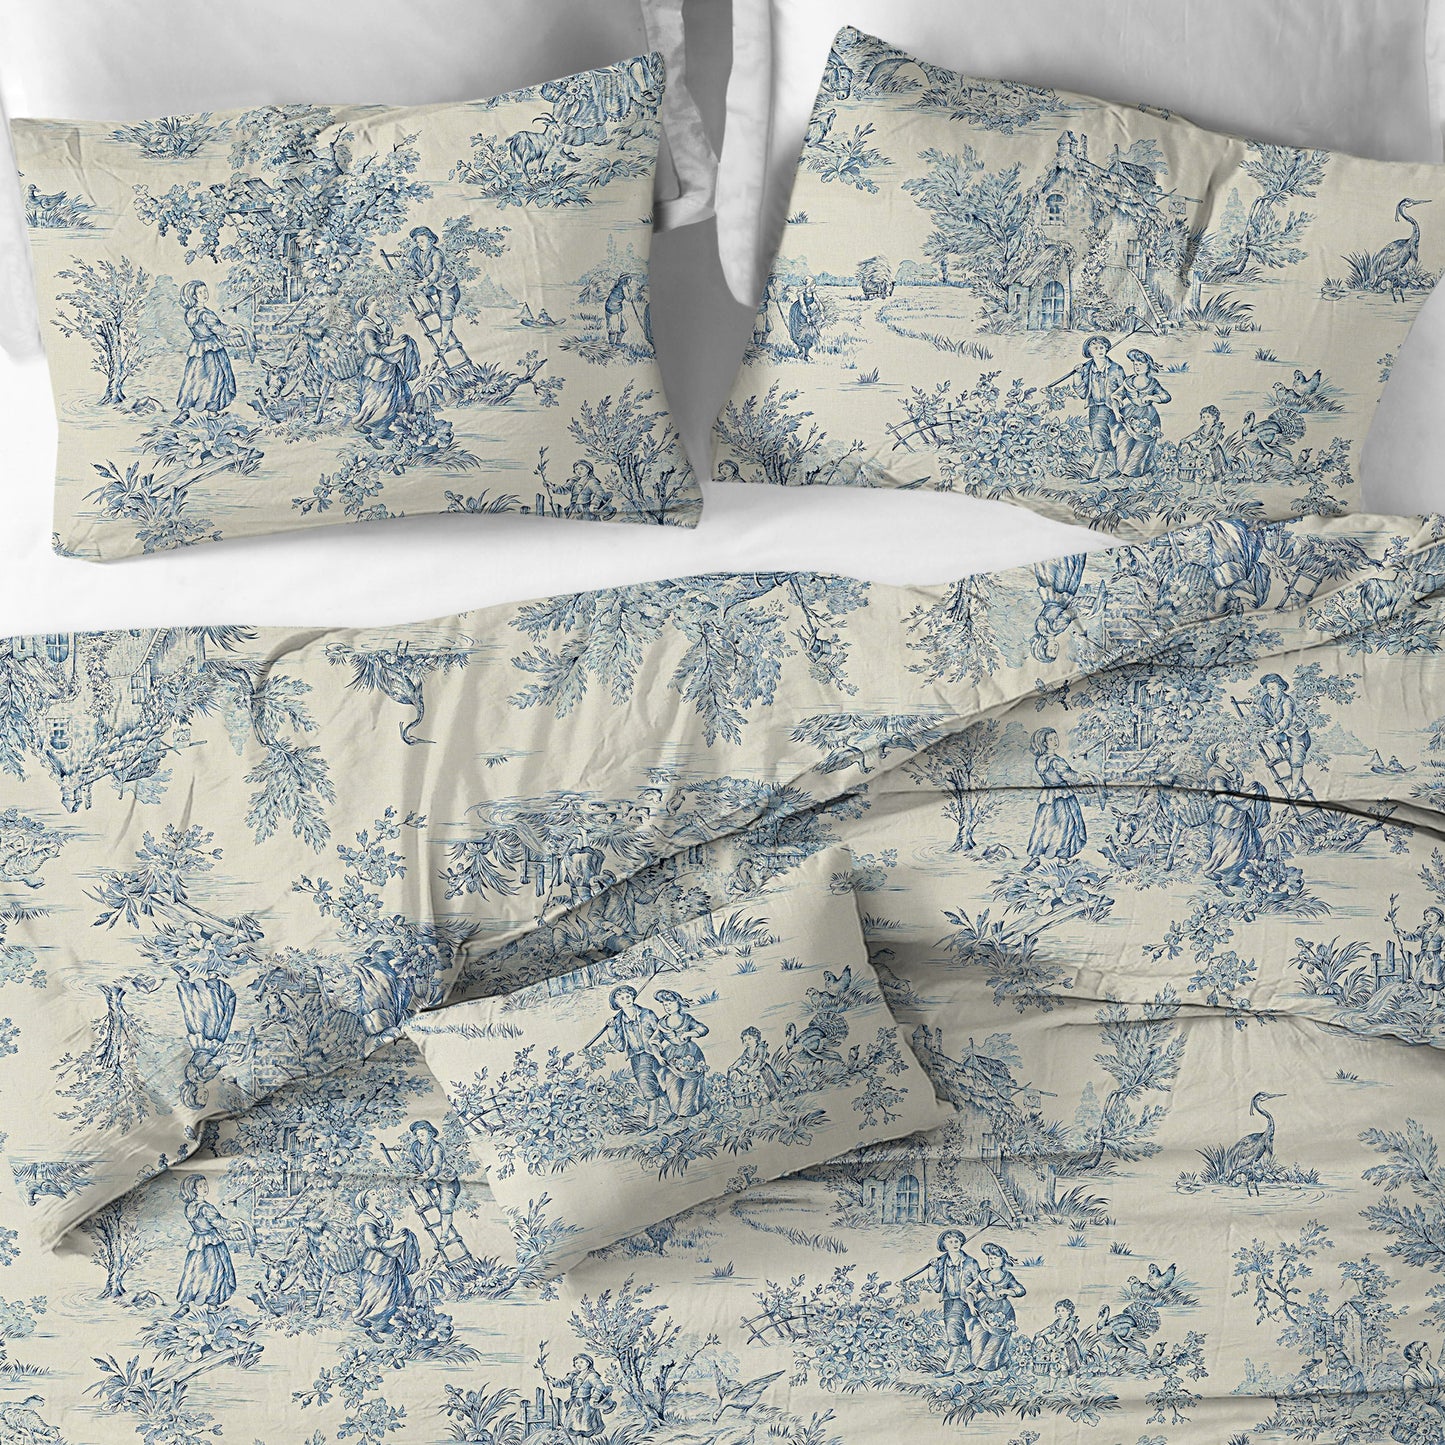 Duvet Cover in Pastorale #2 Blue on Cream French Country Toile